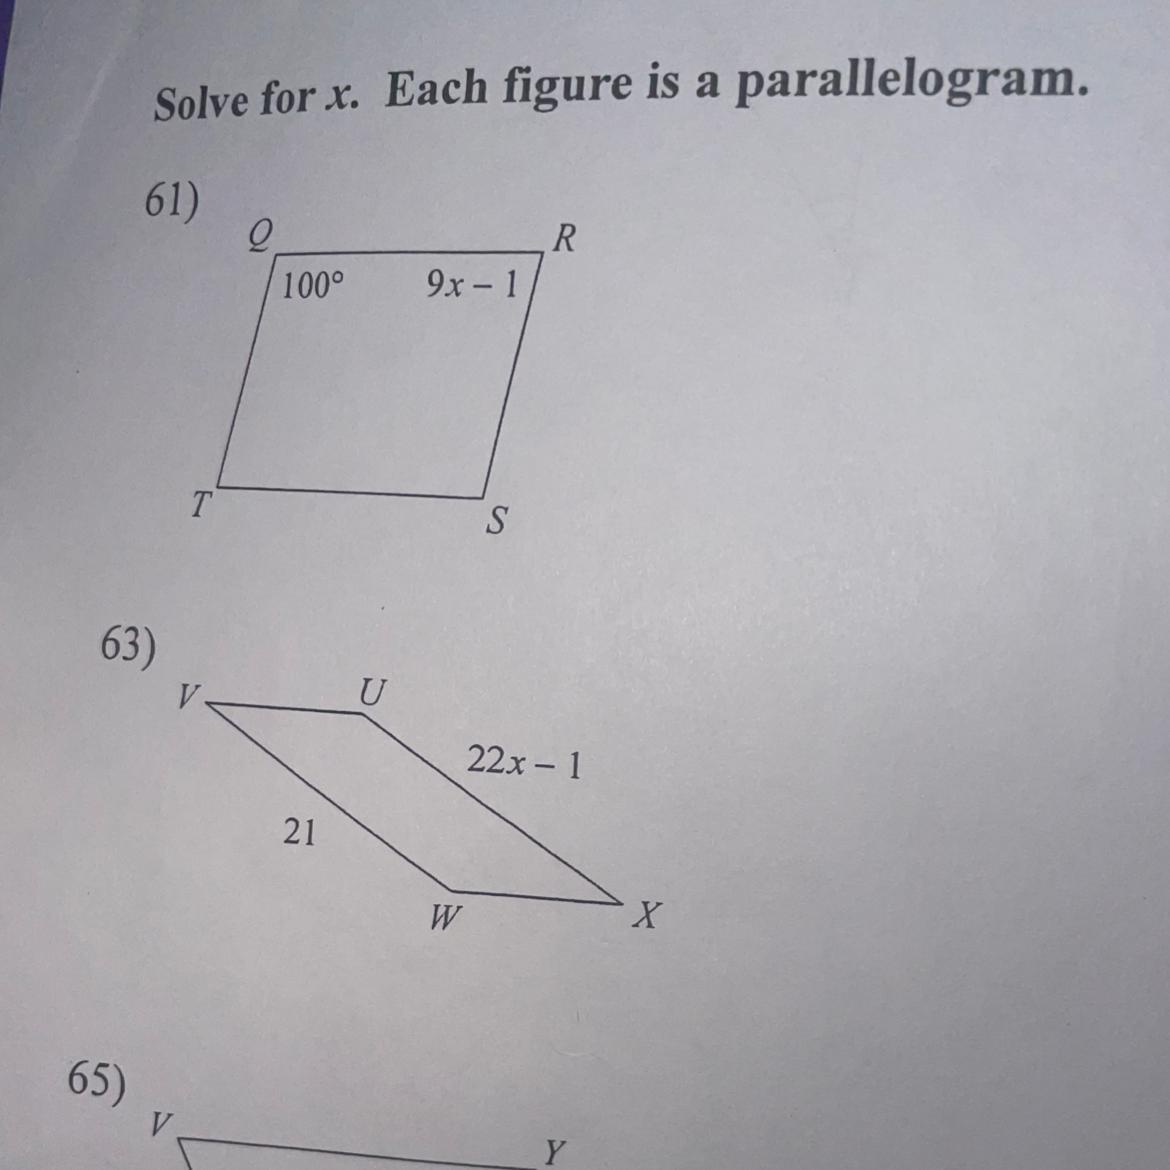 Need Help With Both Questions 